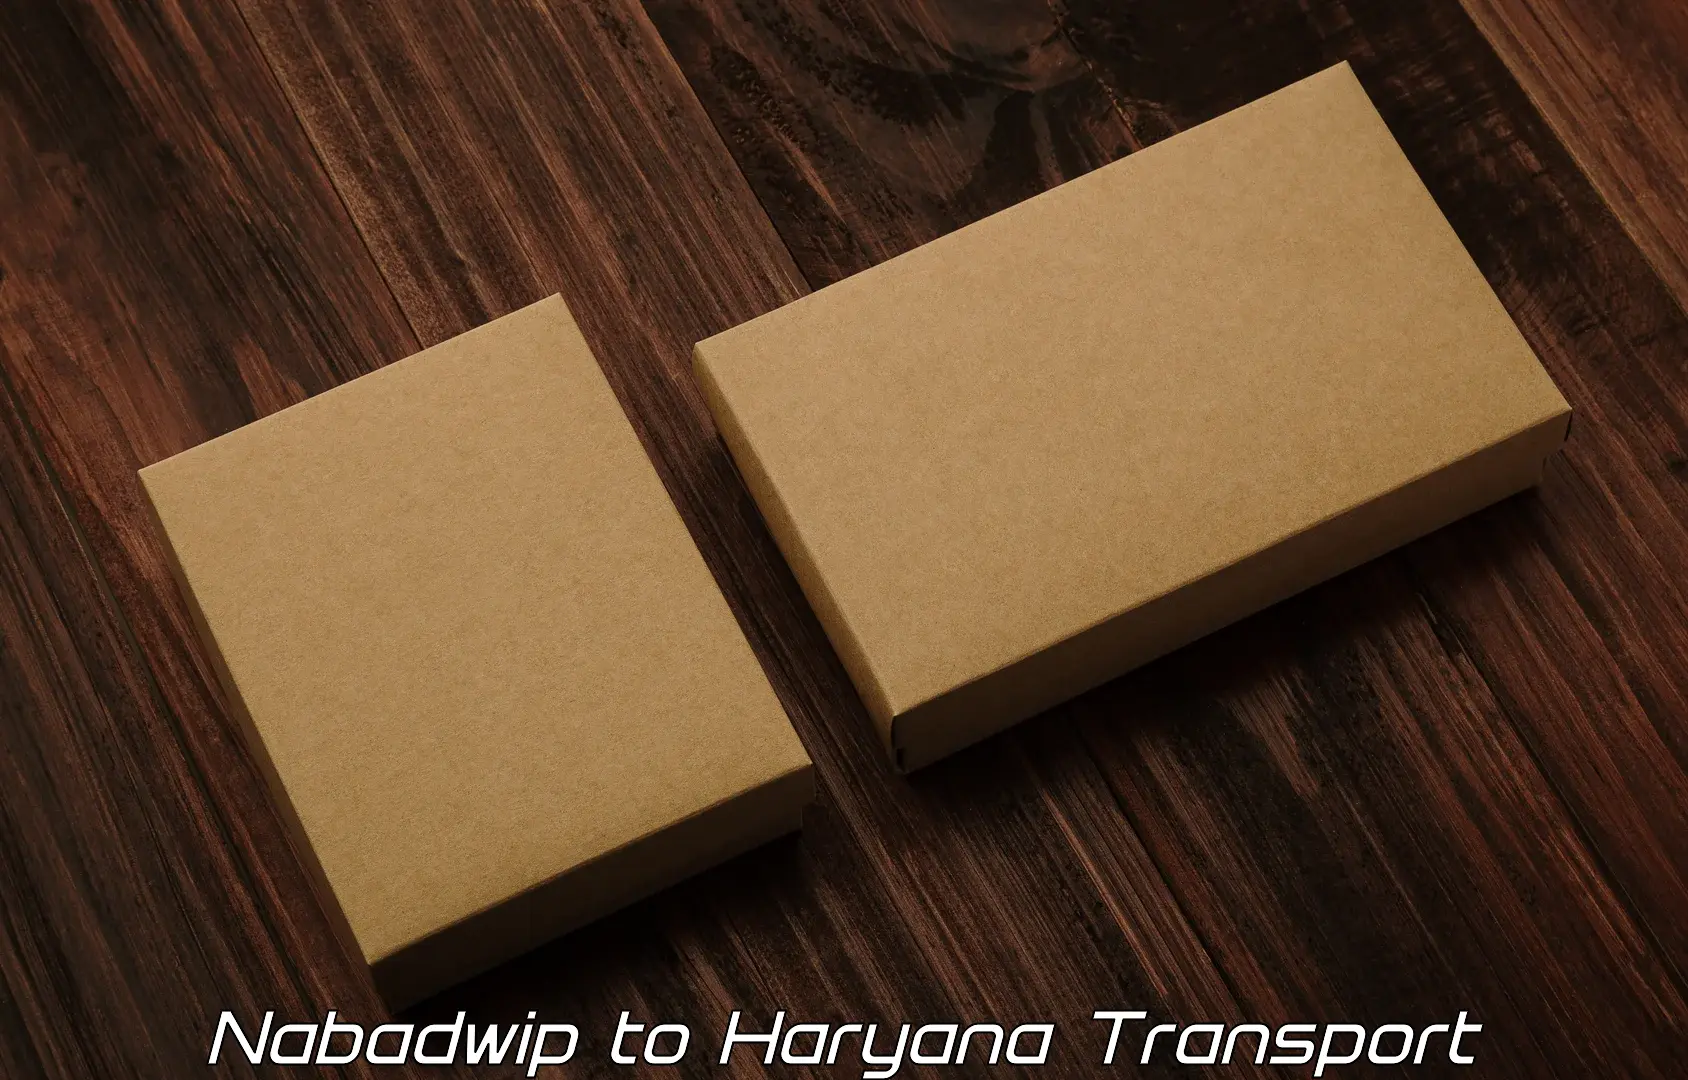 Best transport services in India Nabadwip to NCR Haryana